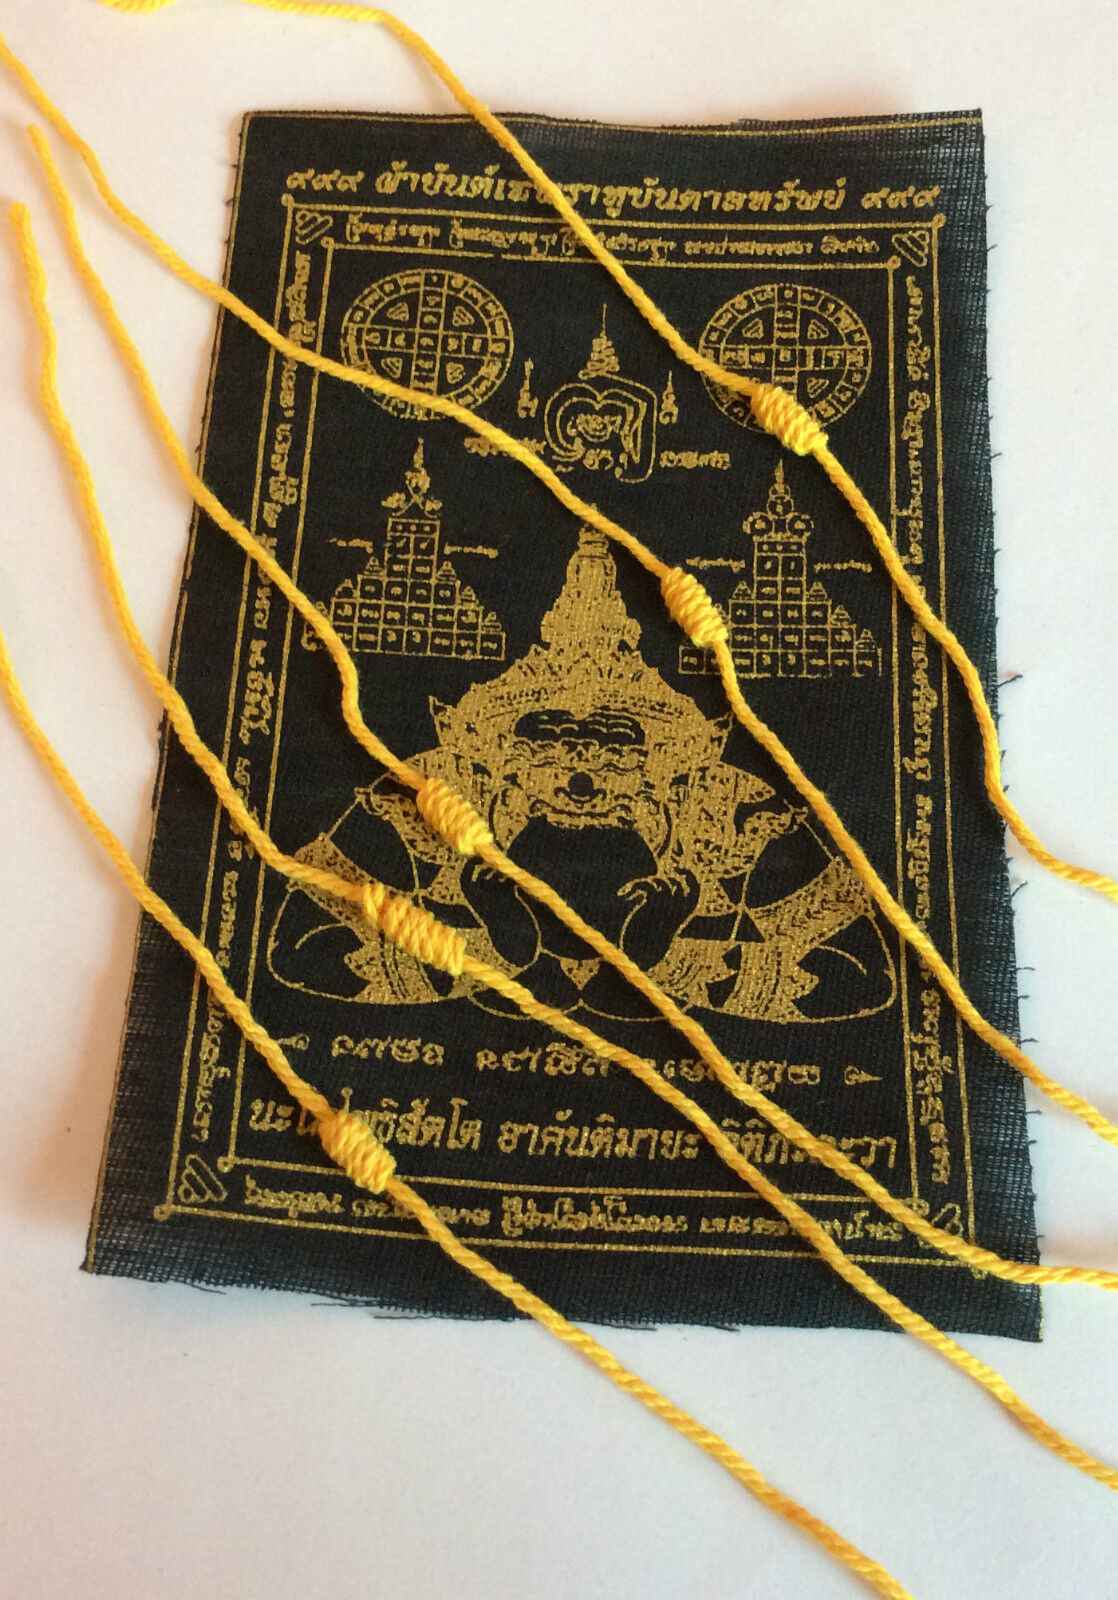 Lot 5 Bracelet Sai Sin yellow Lucky cotton blessed Buddhism Thailand